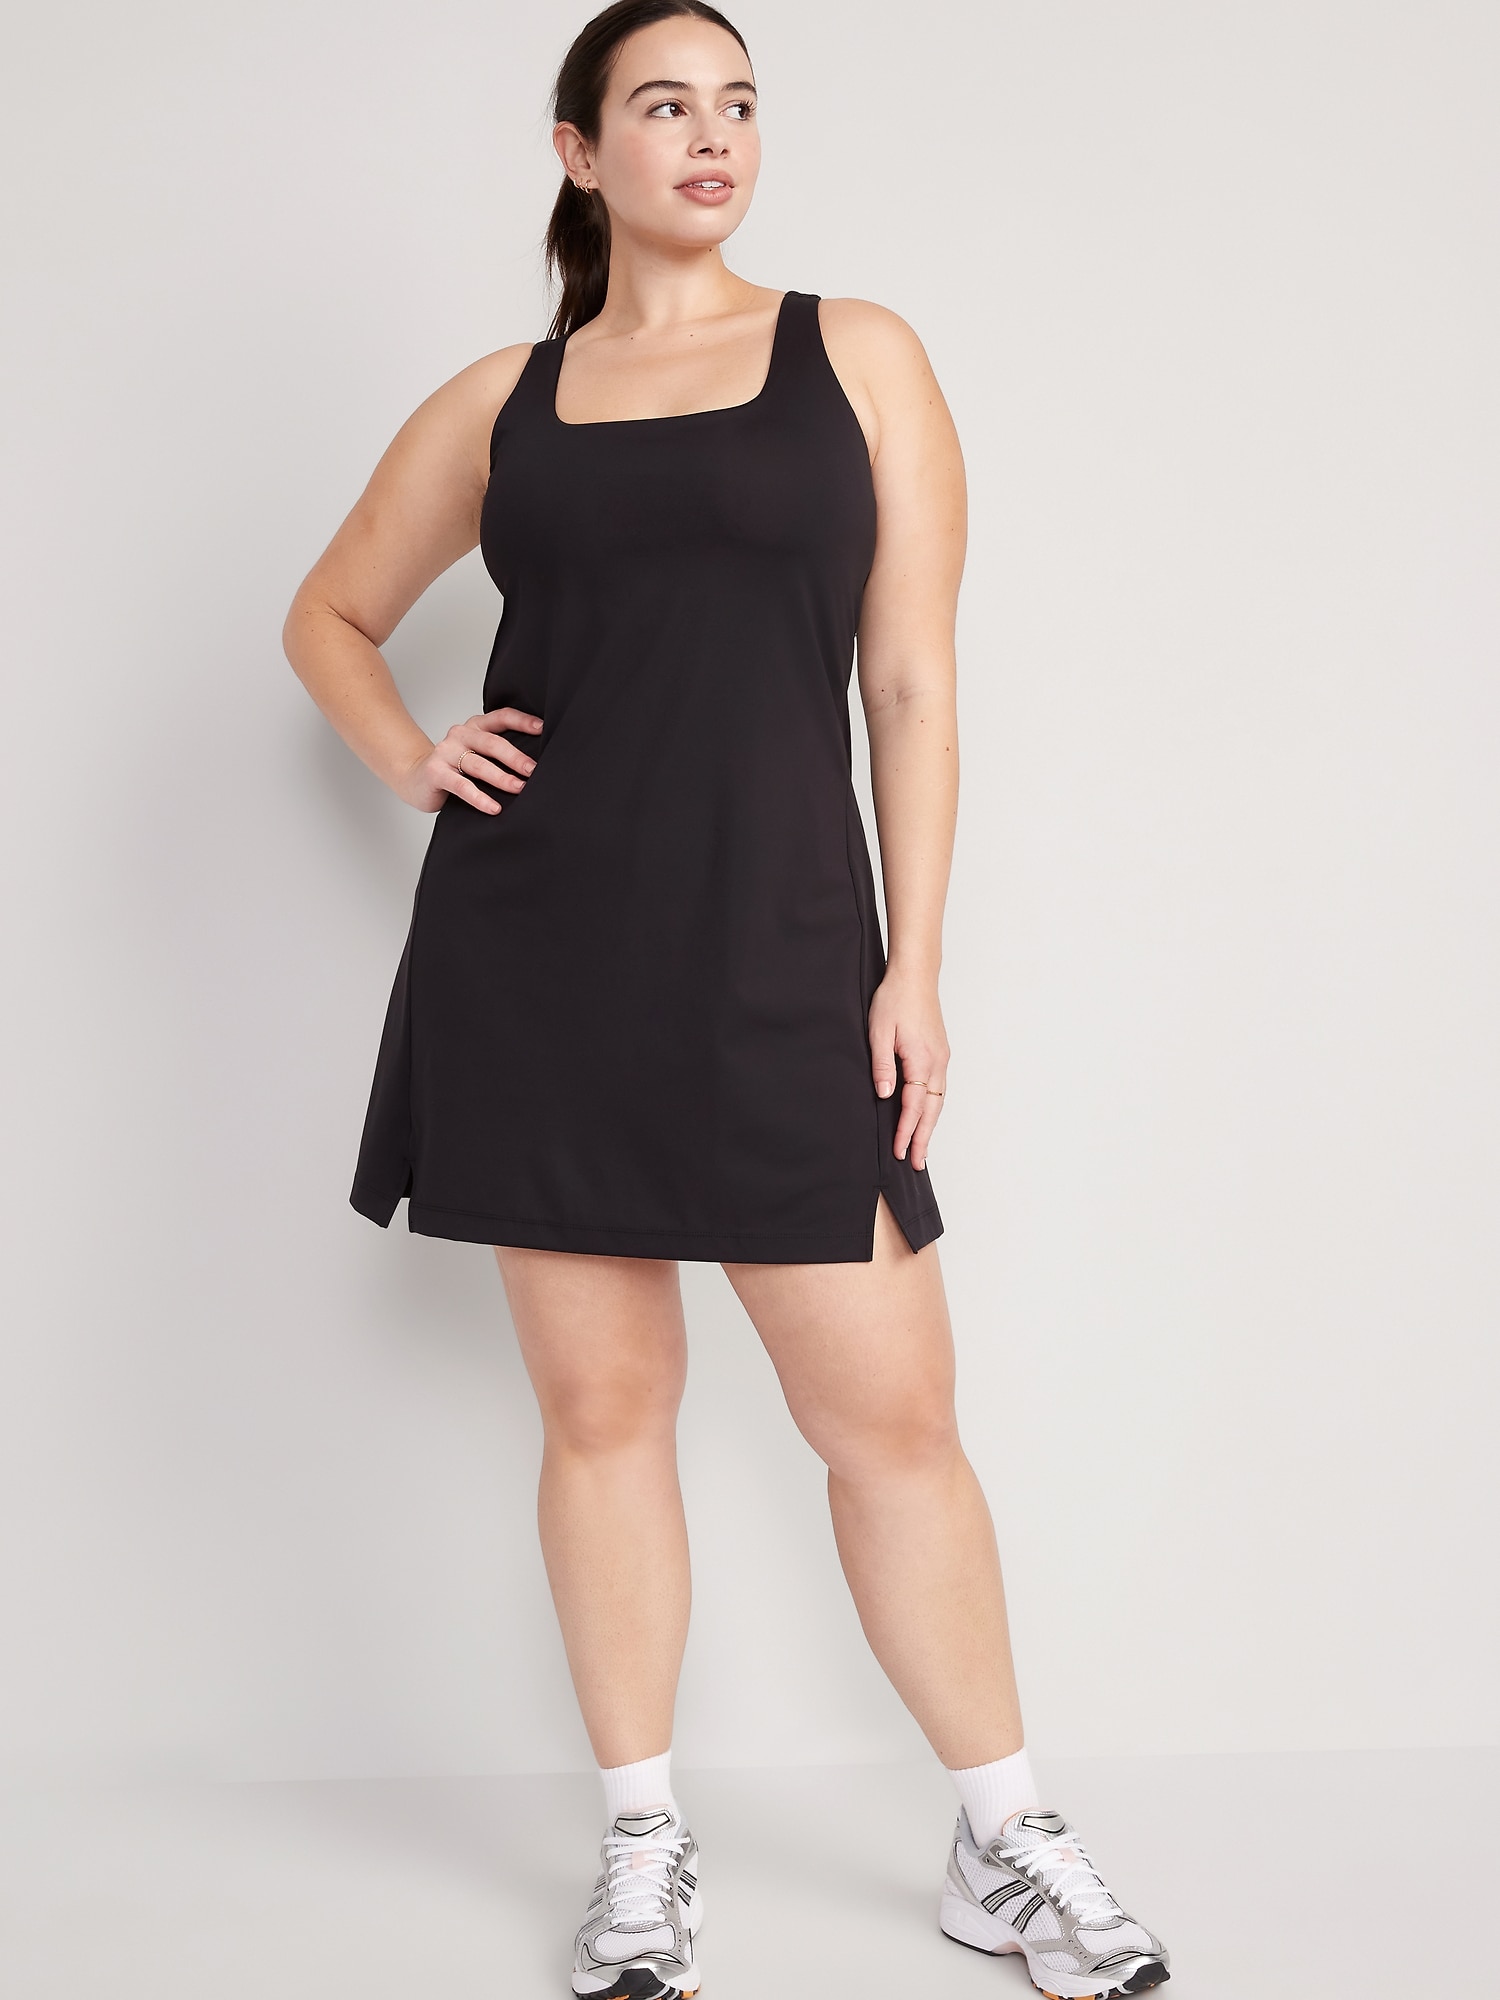 PowerSoft Square-Neck Athletic Dress | Old Navy